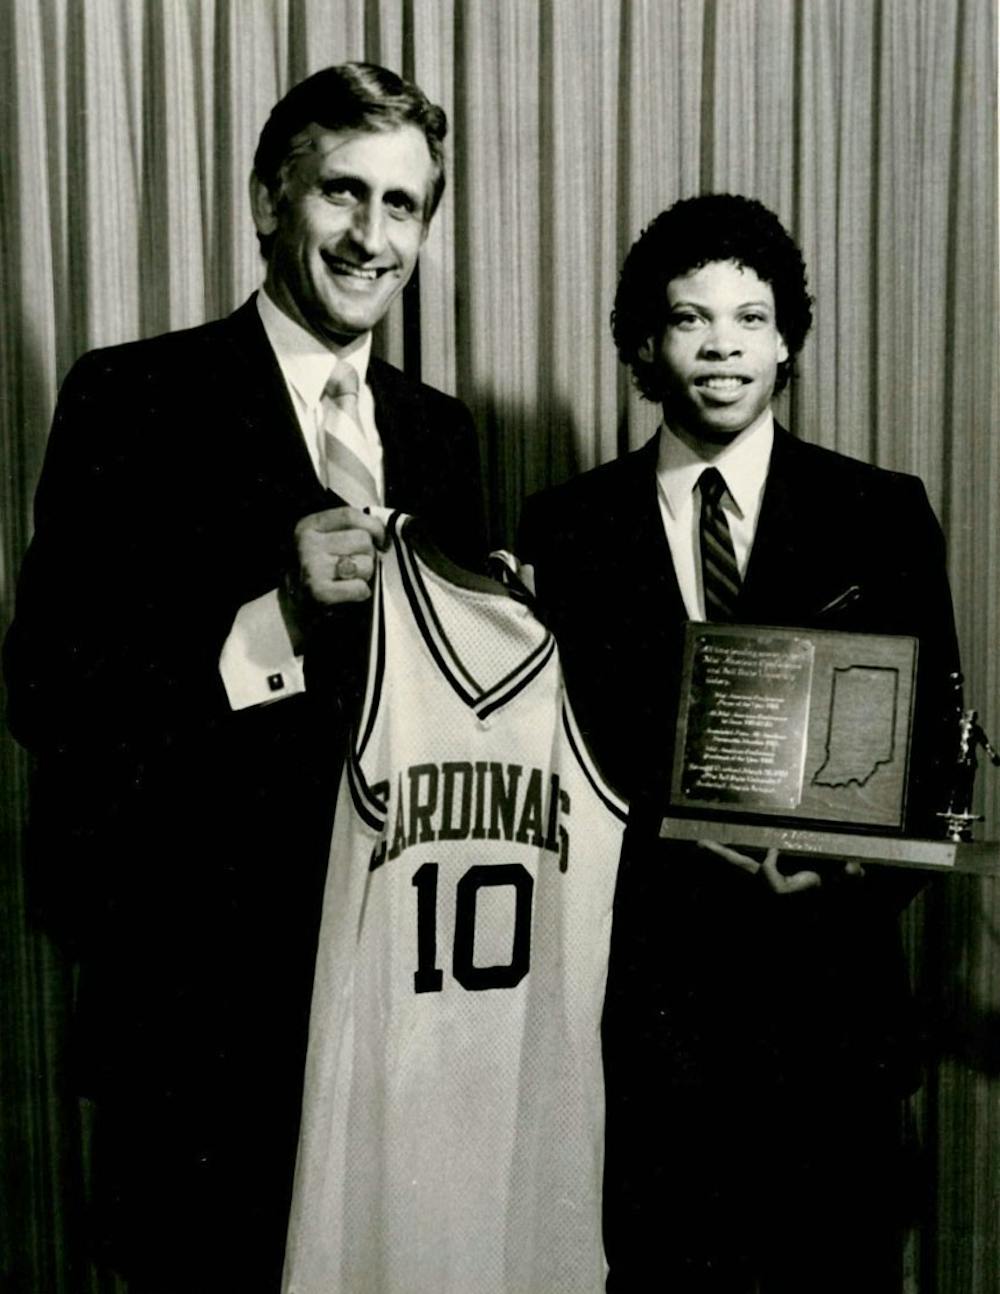 Ray McCallum played basketball at Ball State from 1979-83 with Al Brown on the coaching staff. Brown and McCallum have since both been inducted in the Indiana High School Basketball Hall of Fame. Ball State Athletics, Photo Courtesy